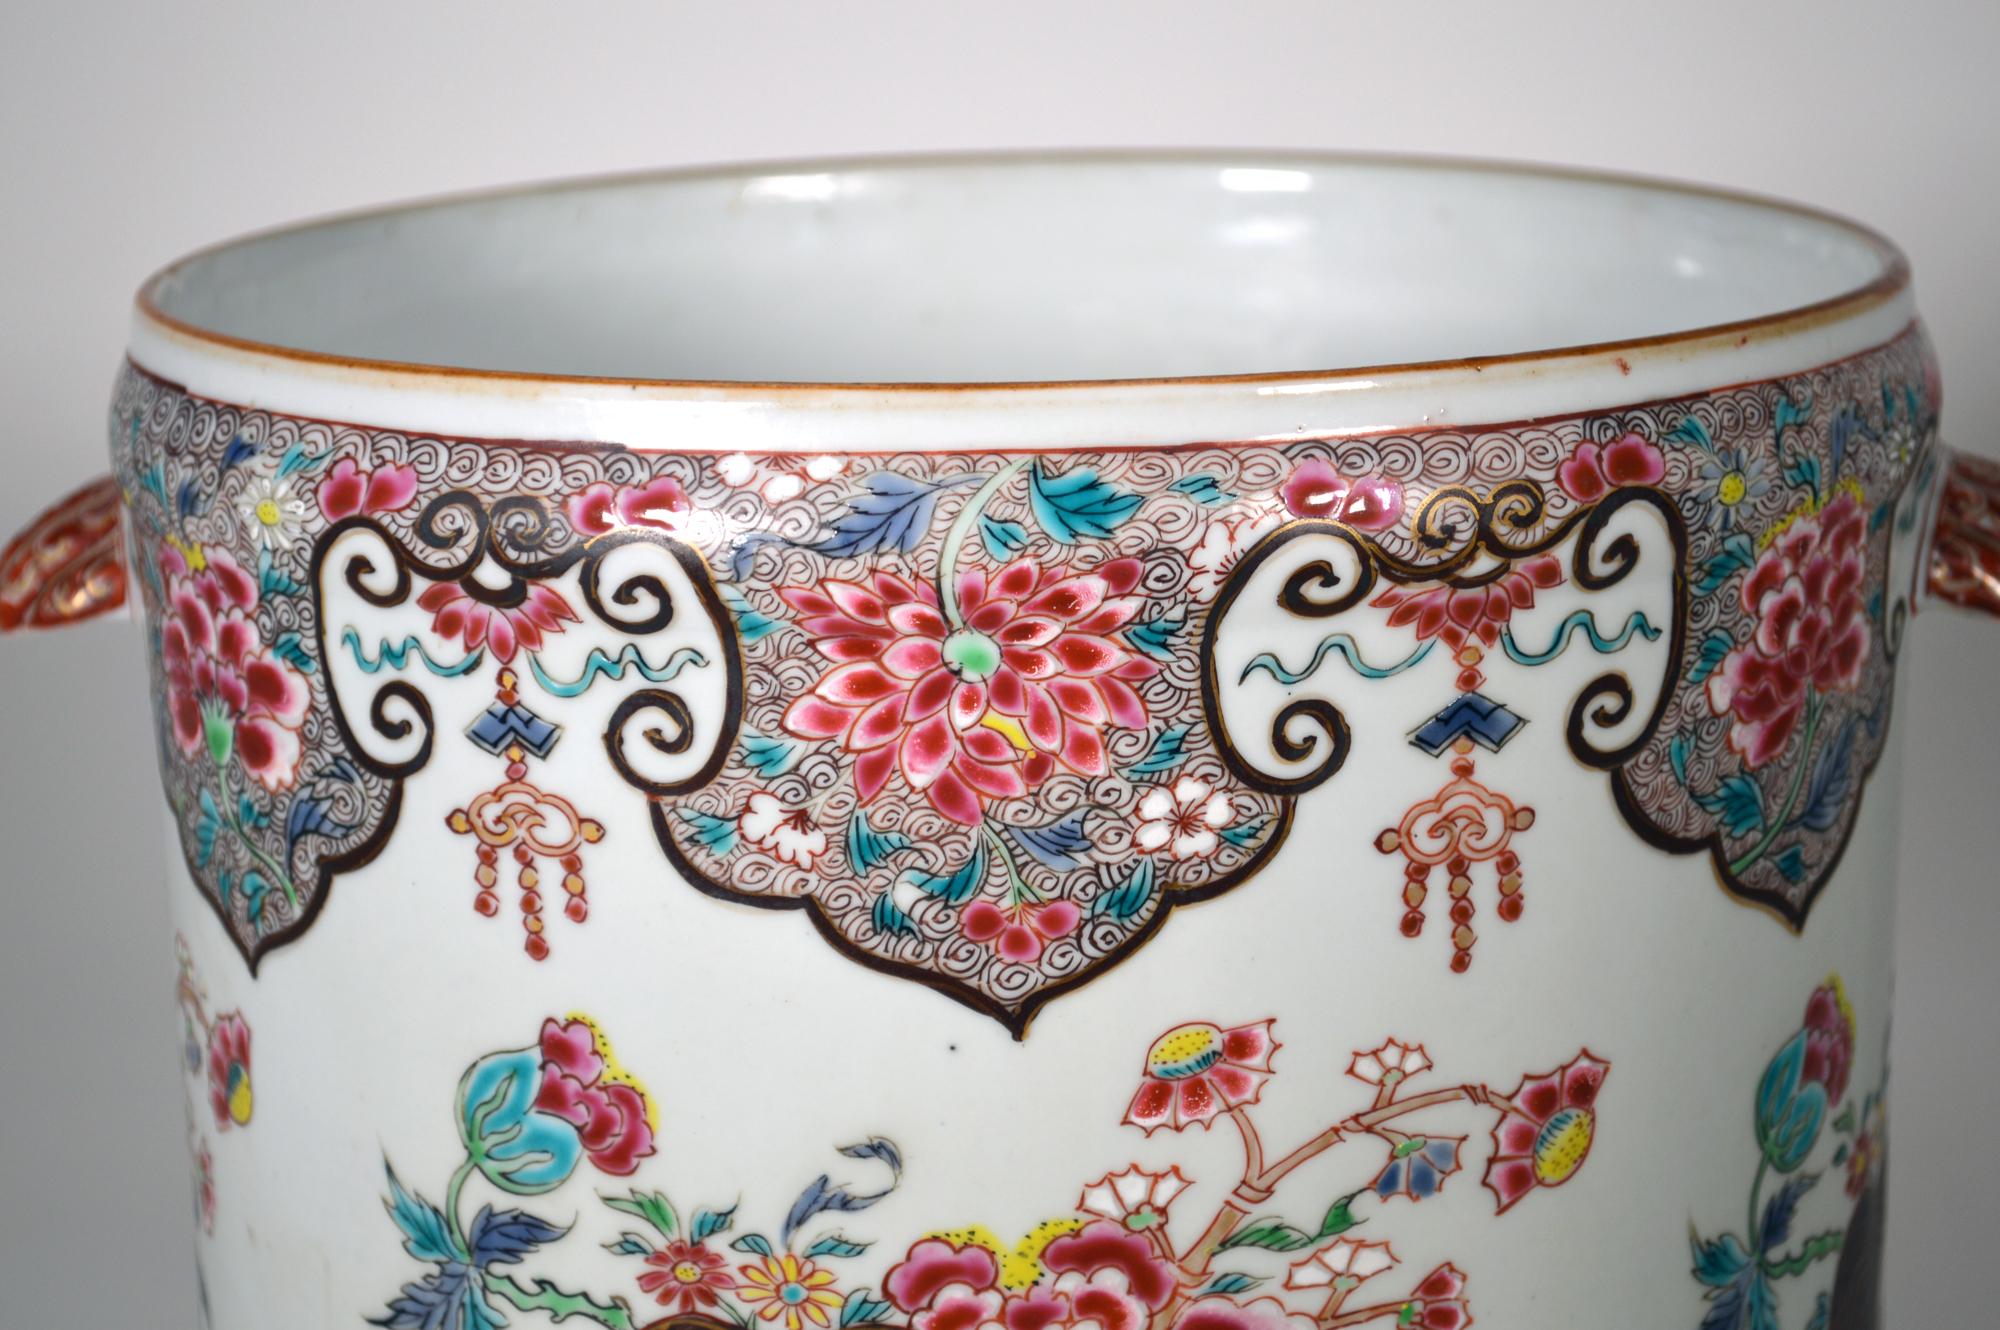 18th-century Chinese Export Porcelain Large Famille Rose Cachepot For Sale 3